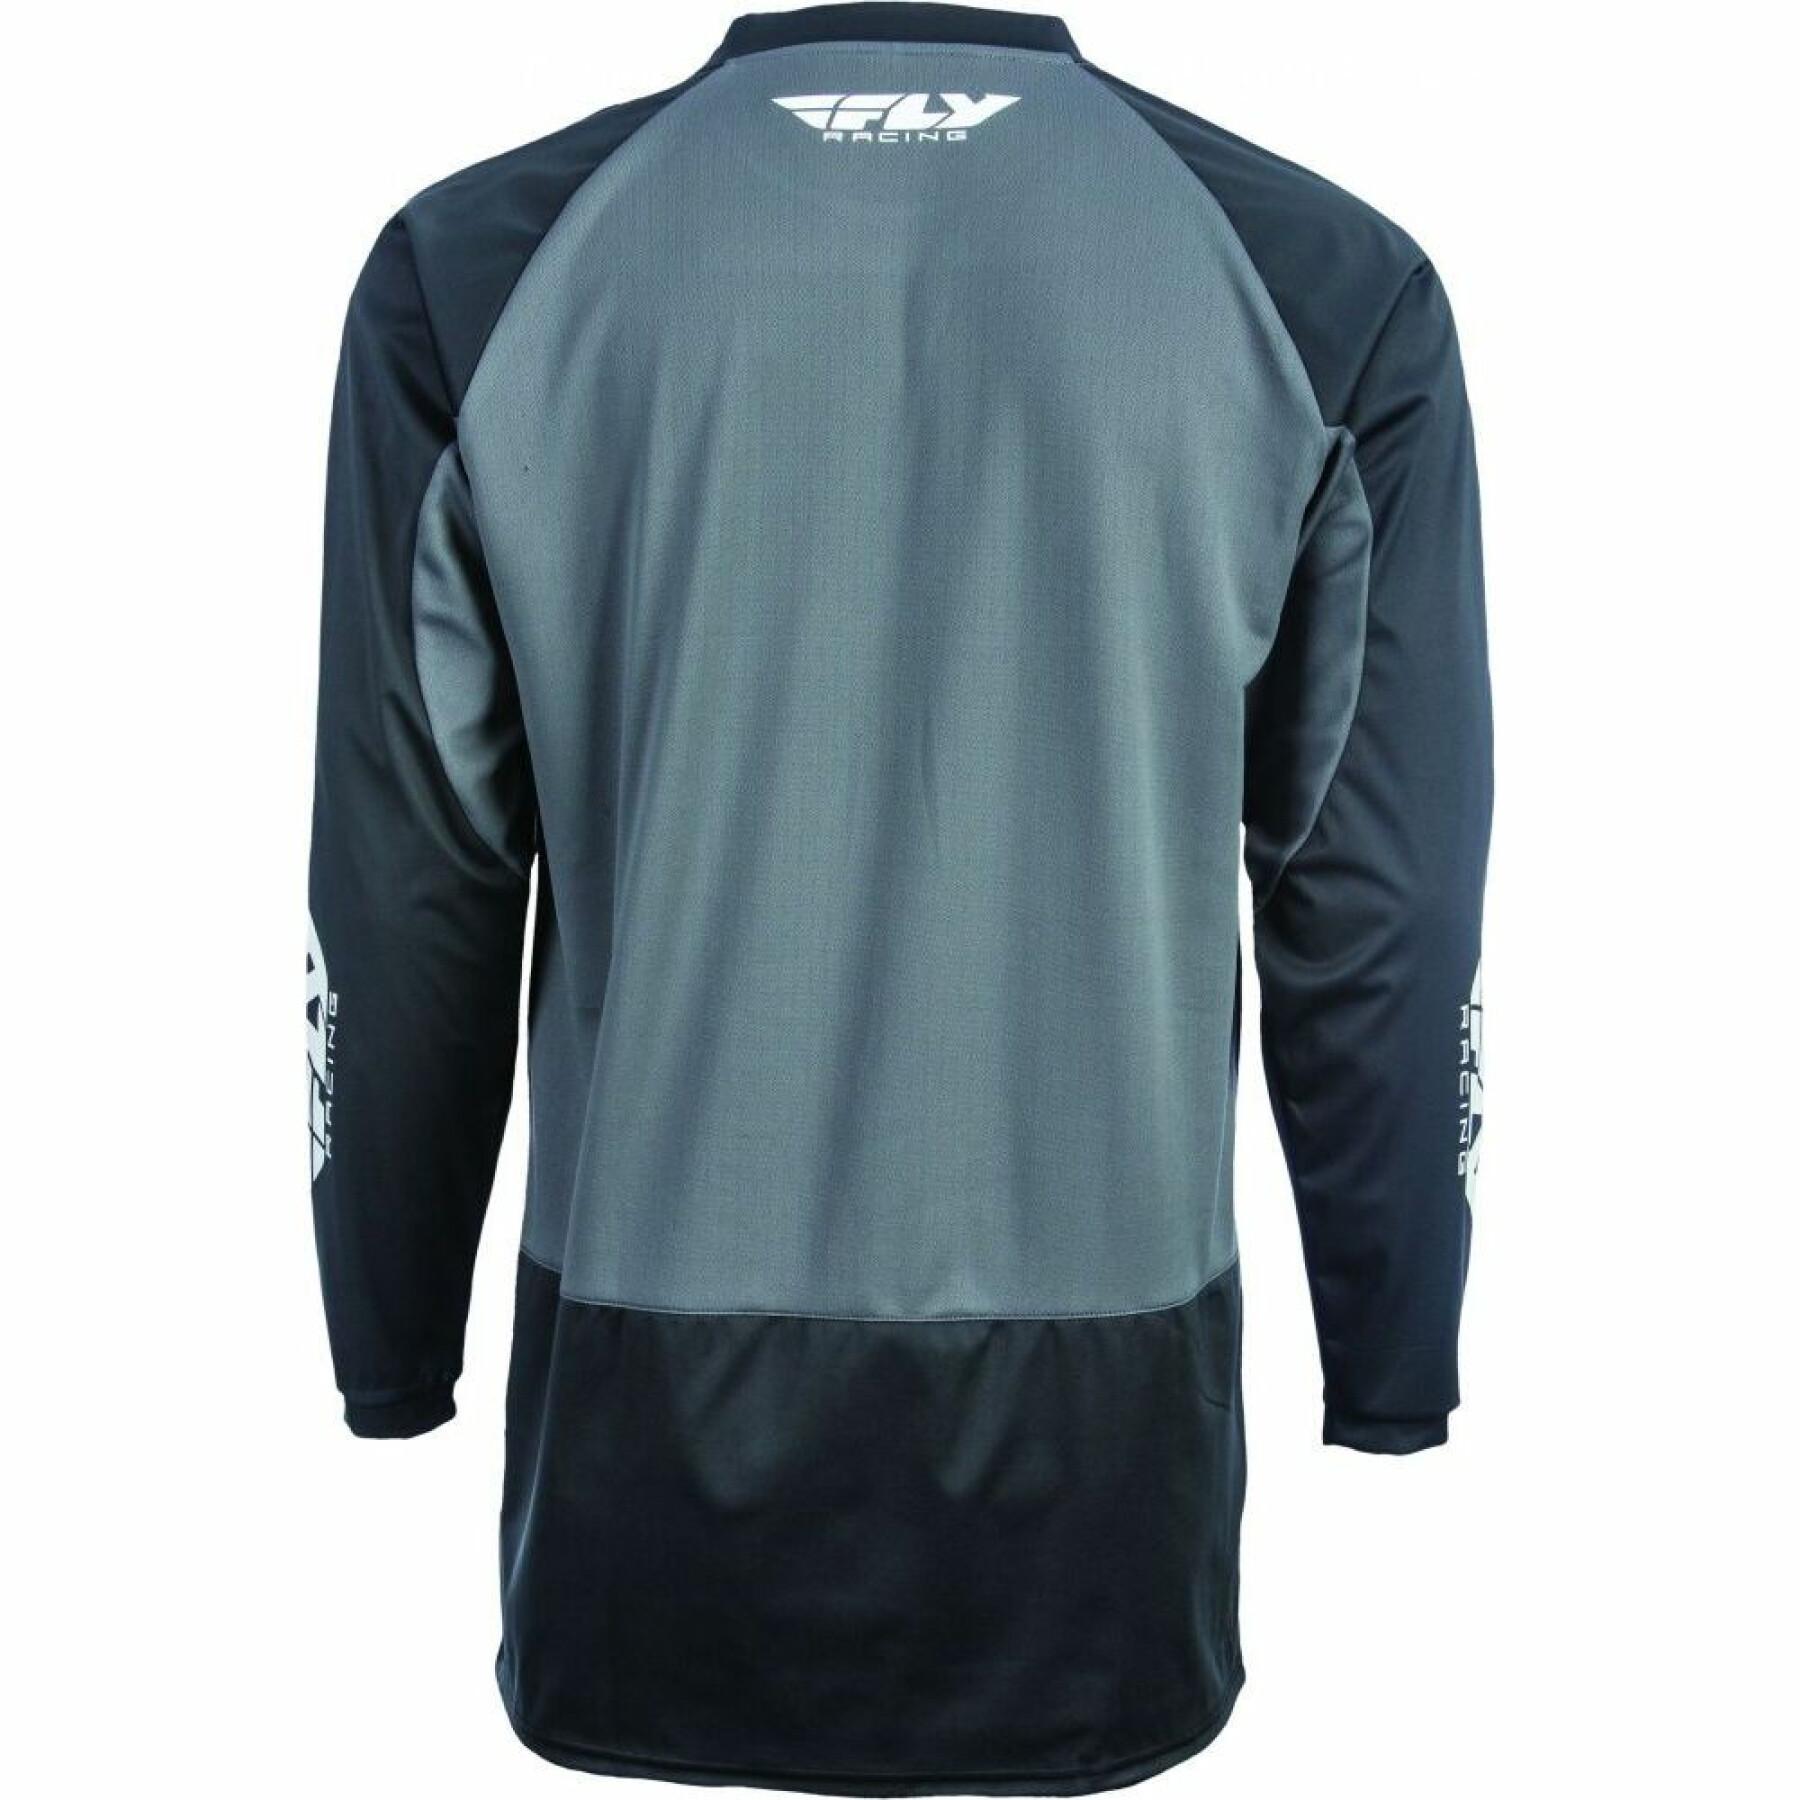 Jersey Fly Racing Windproof 2019